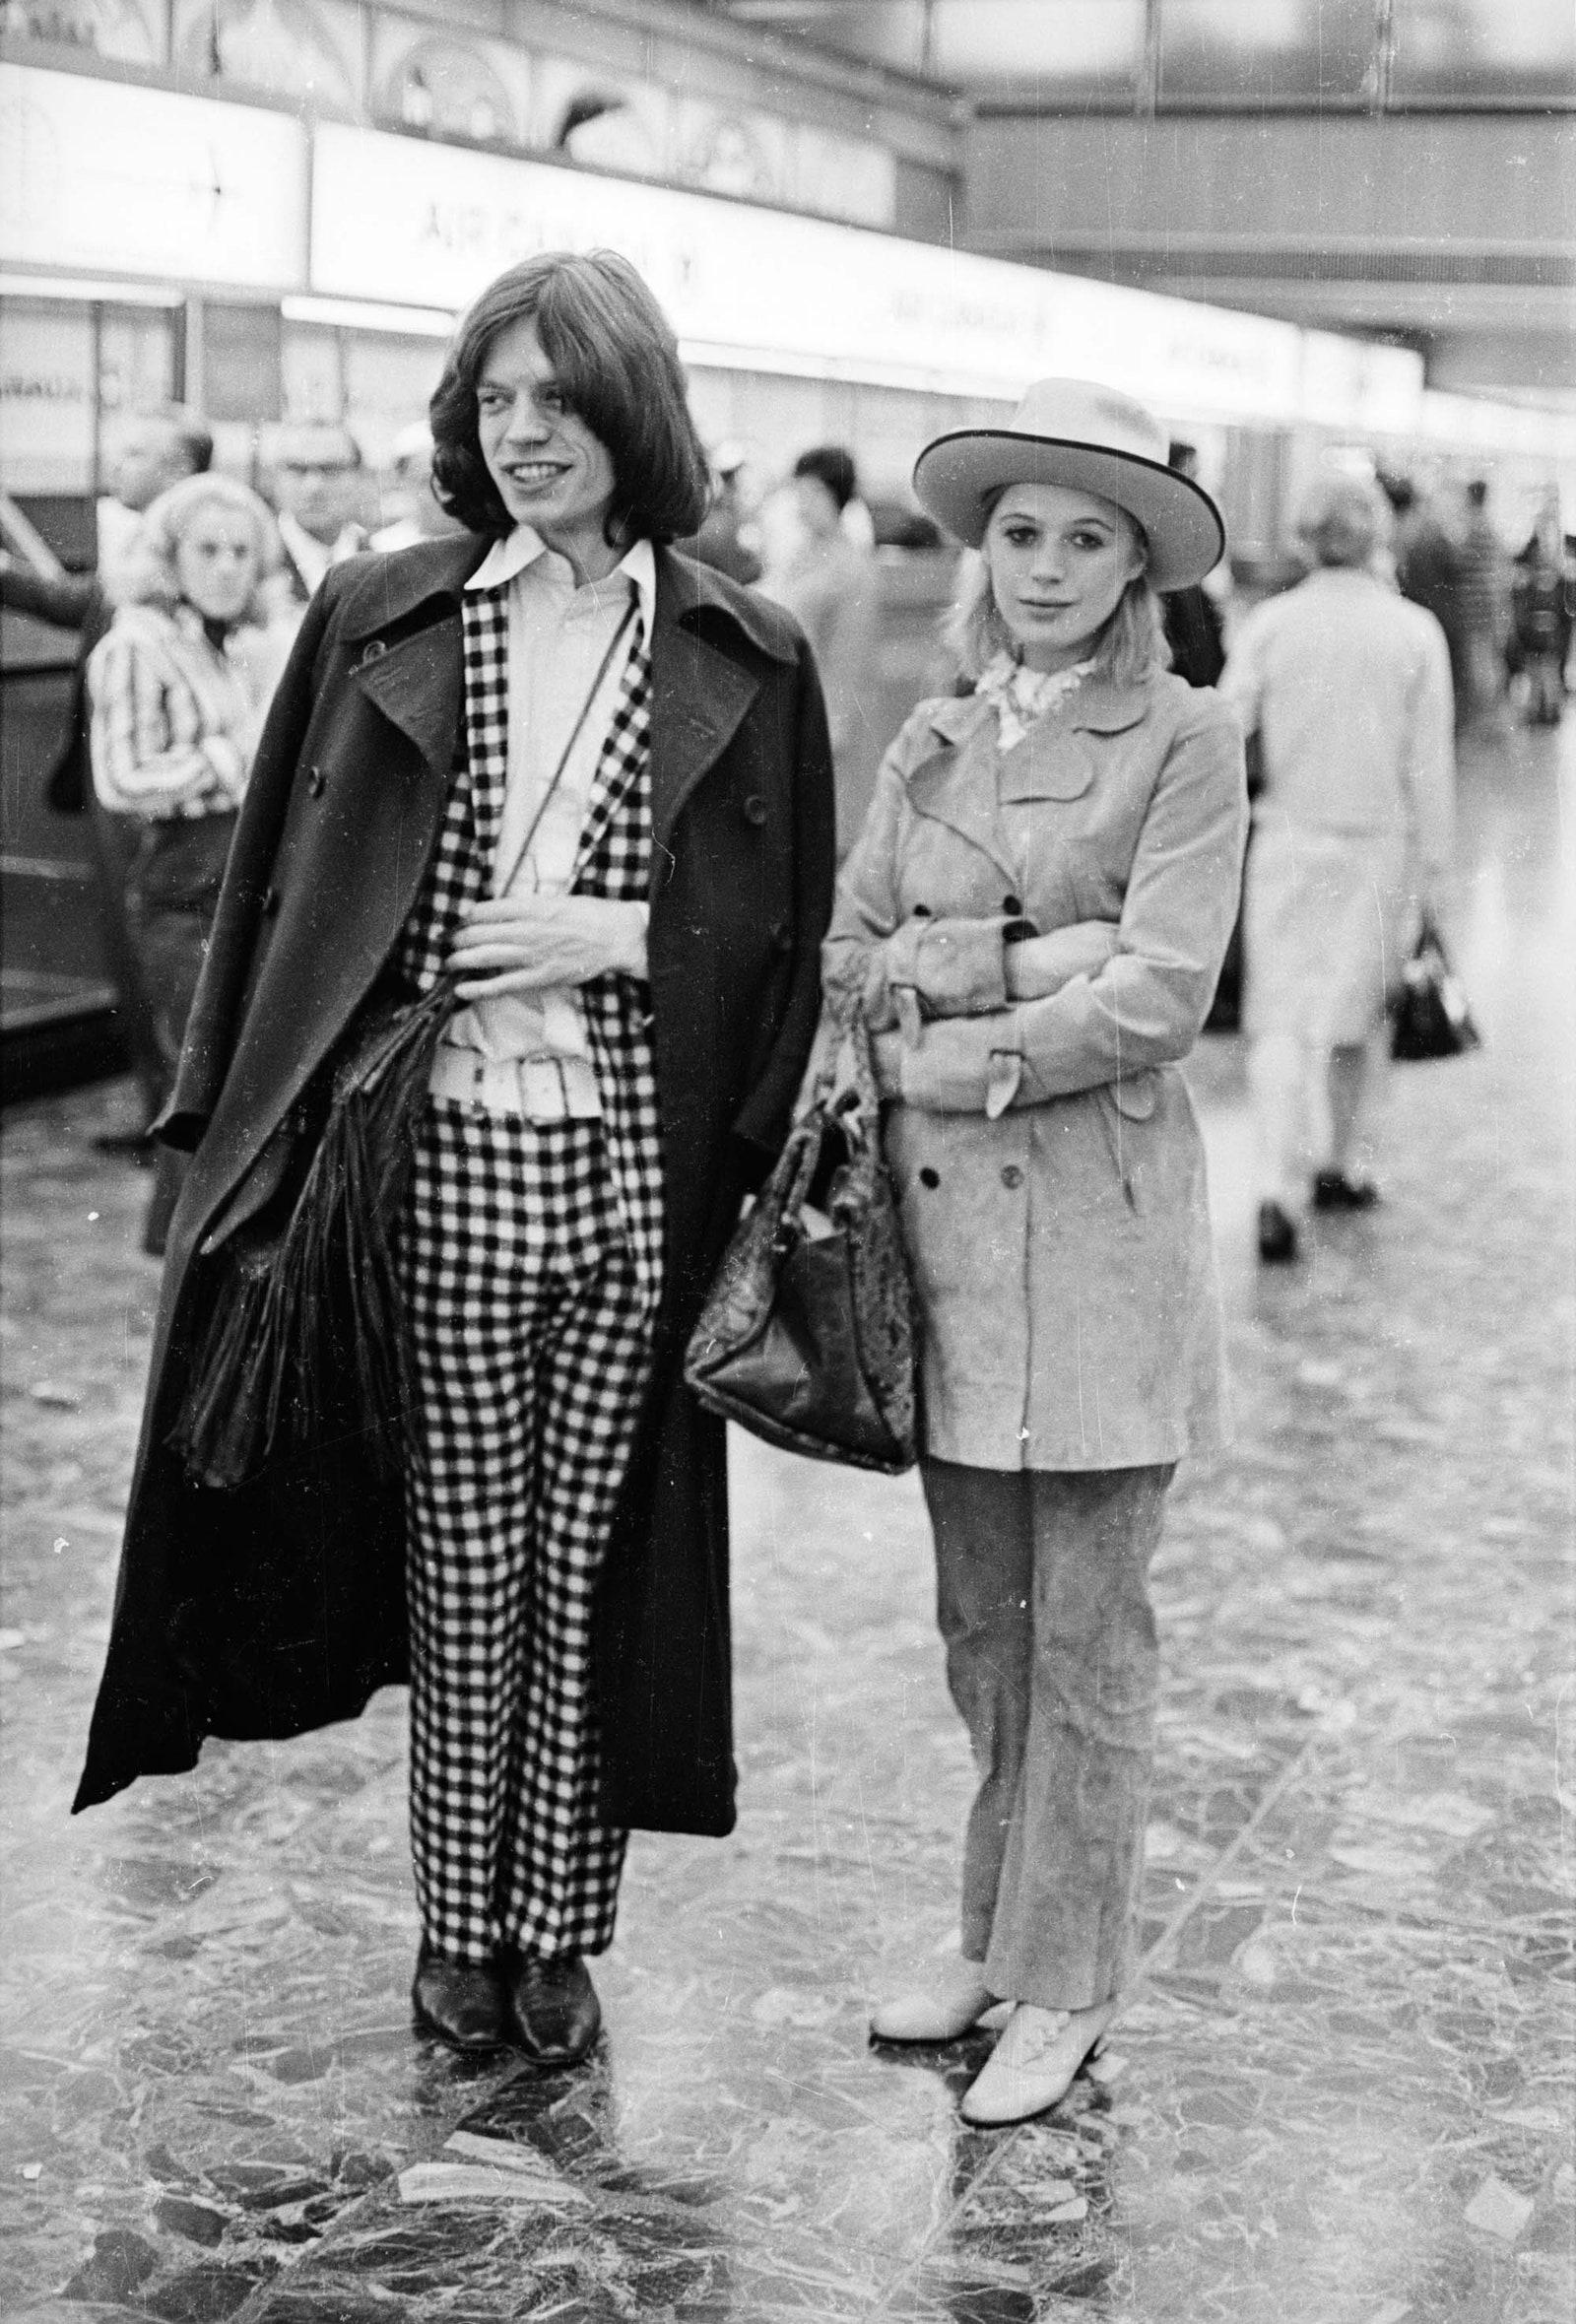 Mick Jagger in his dandy suit